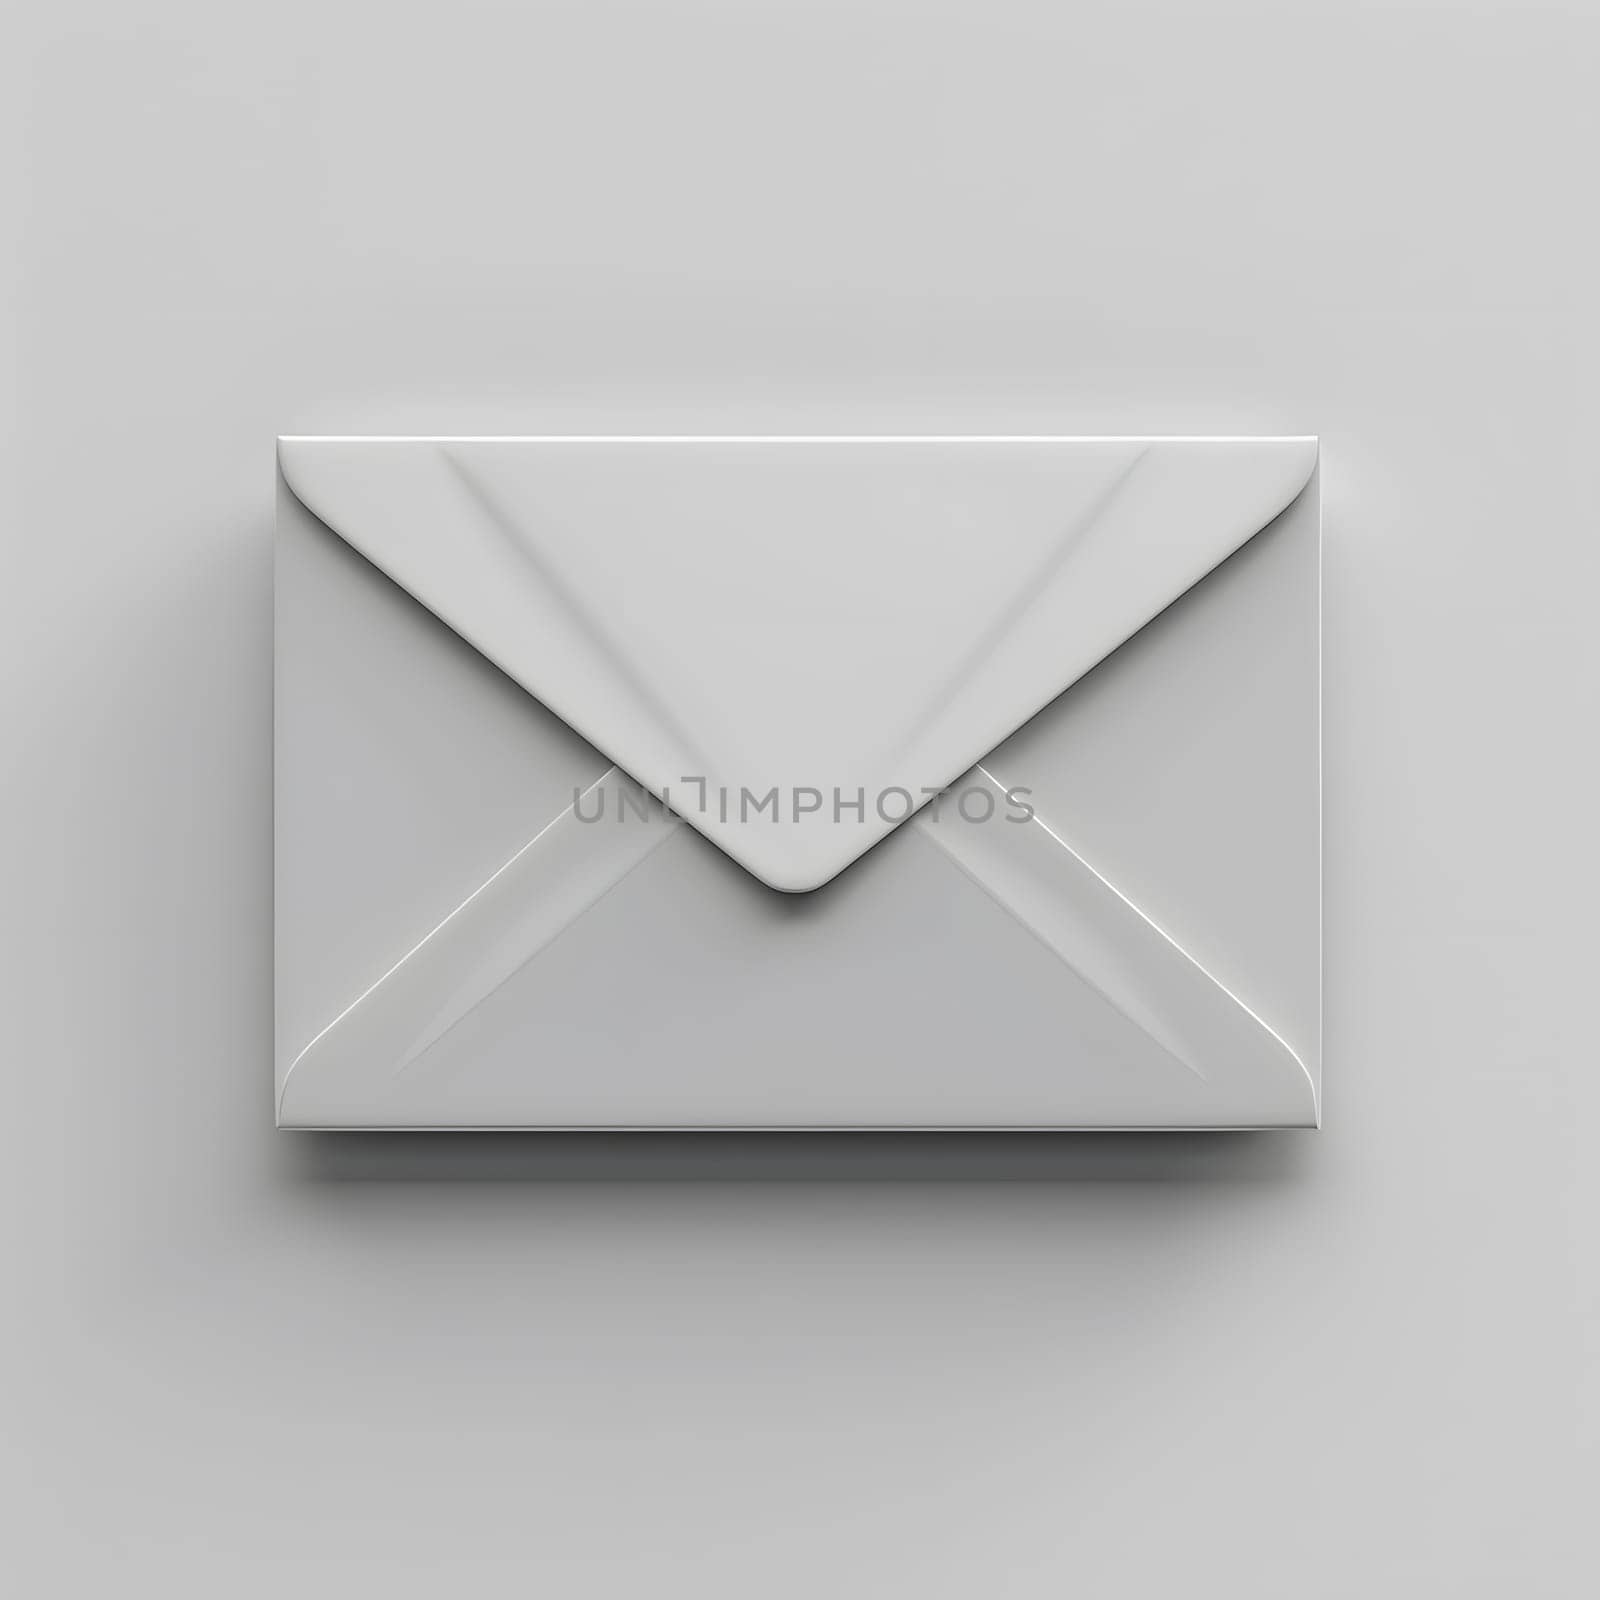 A white rectangle envelope lies on a white surface, blending in seamlessly. Its paper product appearance contrasts against the laptop, dishware, and fashion accessories in the room